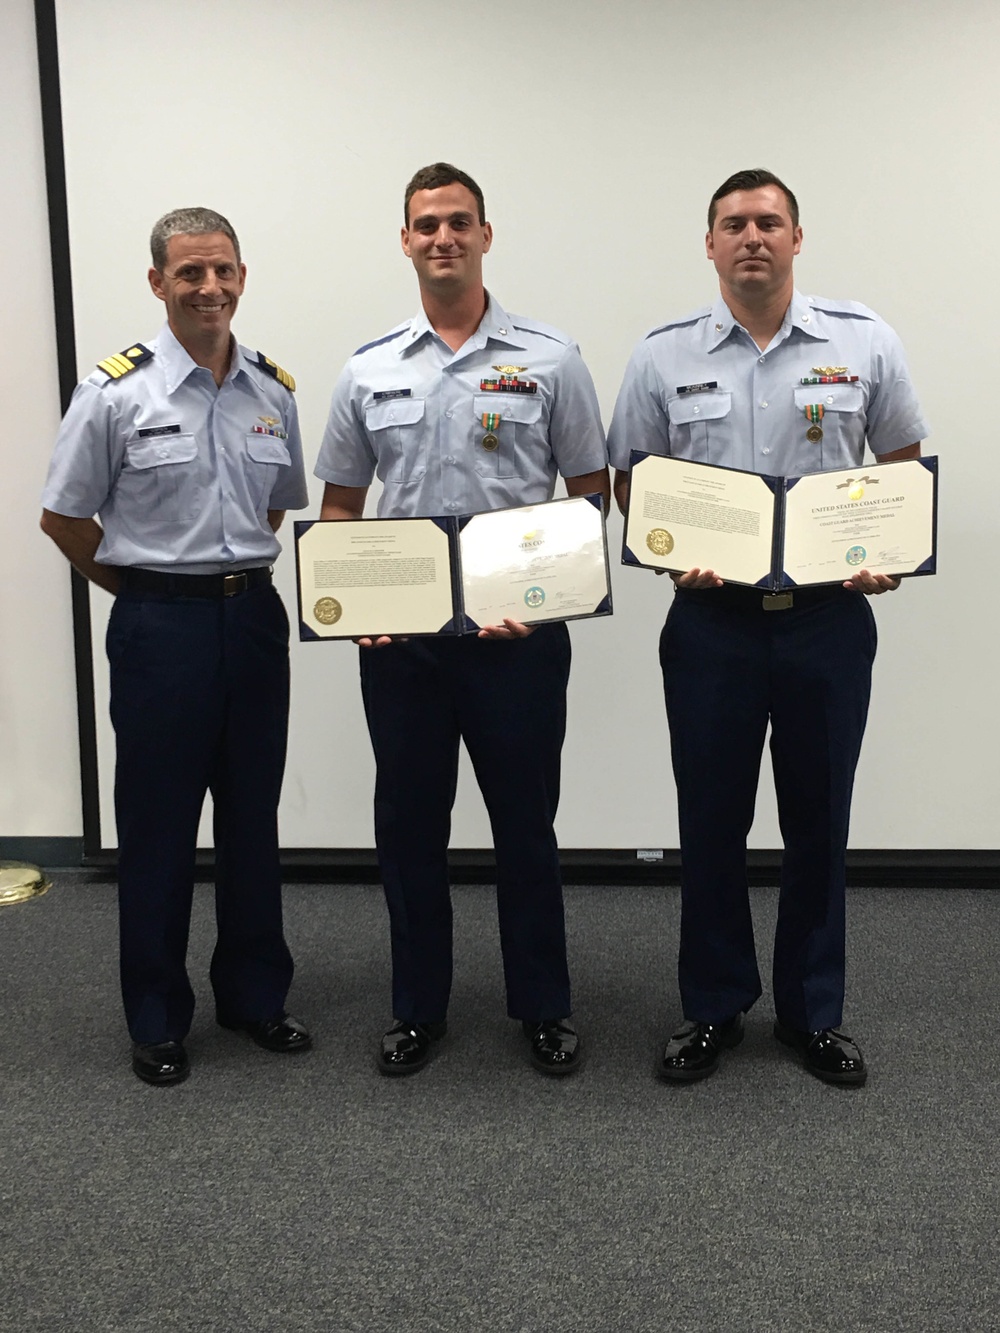 Coast Guardsmen awarded achievement medal for life-saving actions